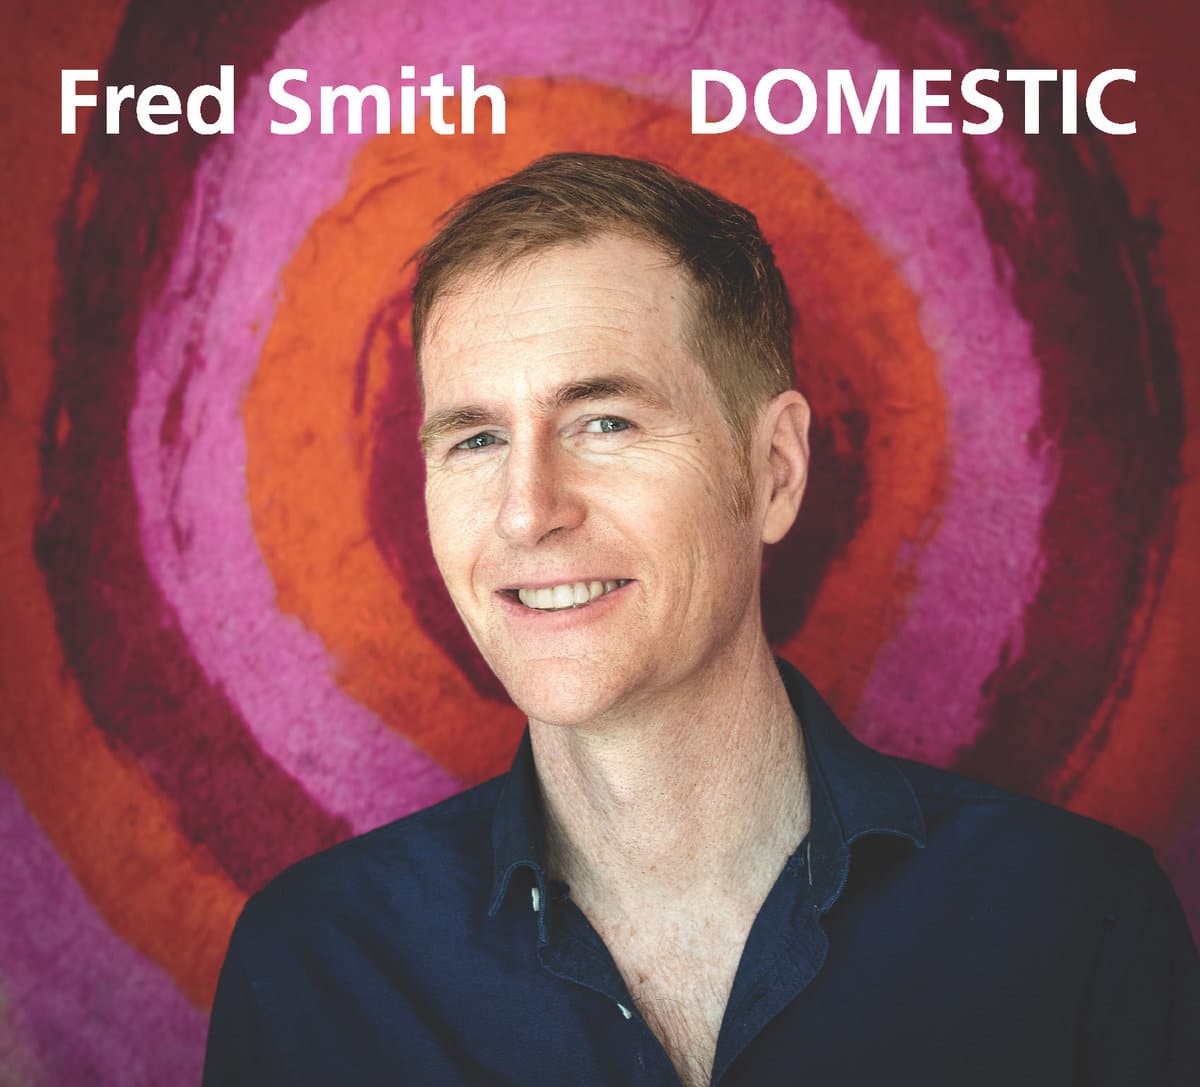 Cover art for Domestic by Fred Smith. Record Drums & Bass for 3 songs: Infidel Studios